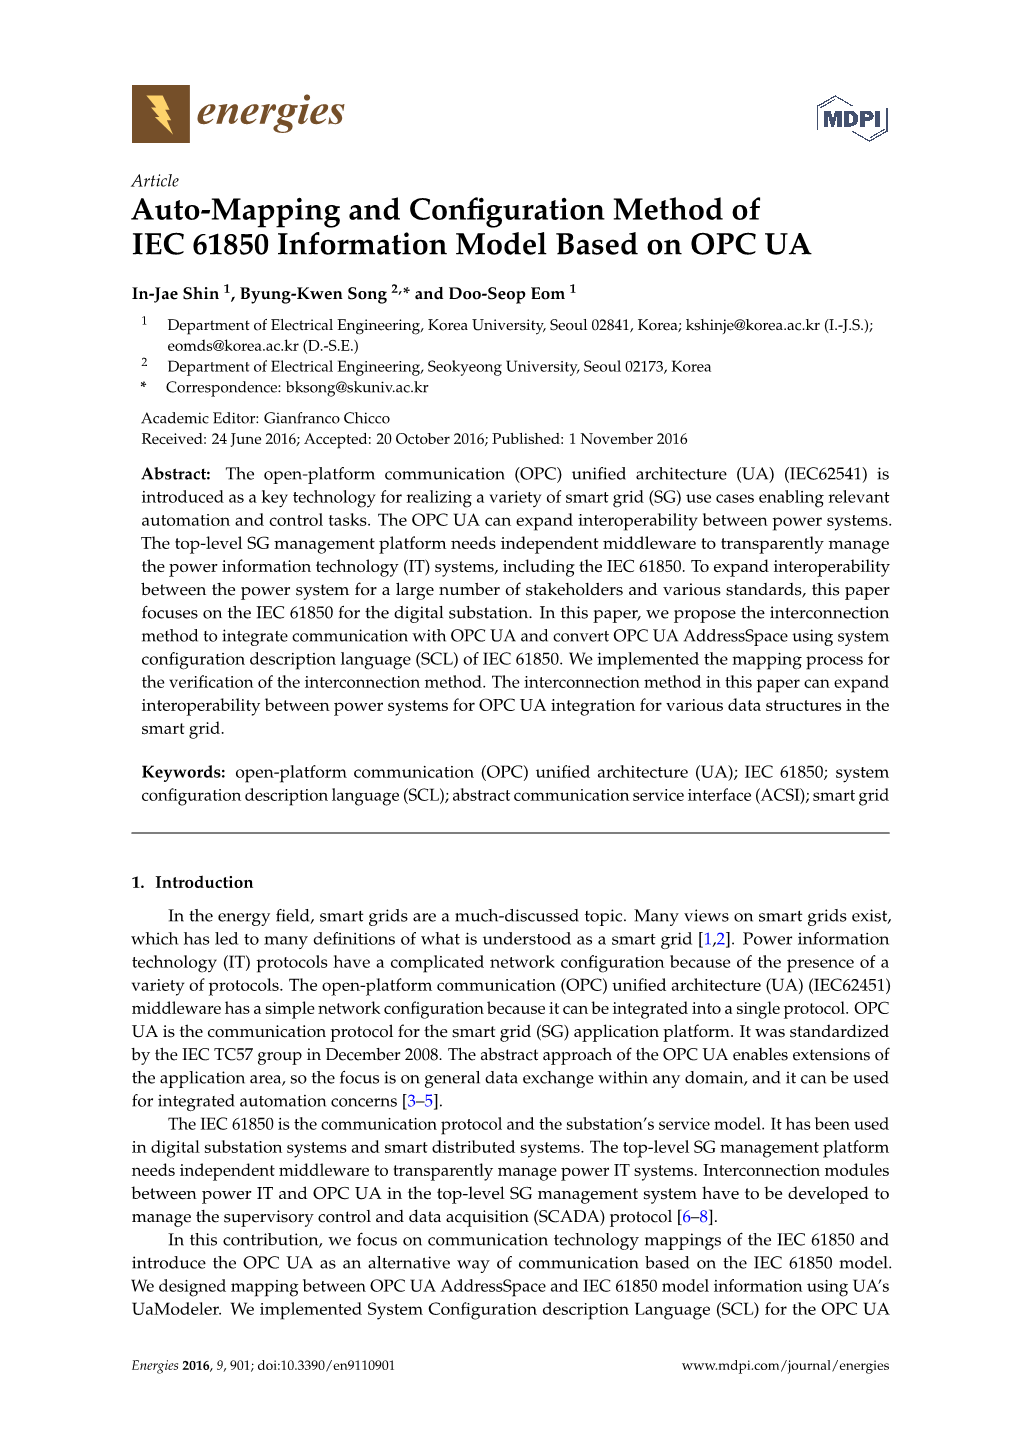 Auto-Mapping and Configuration Method of IEC 61850 Information